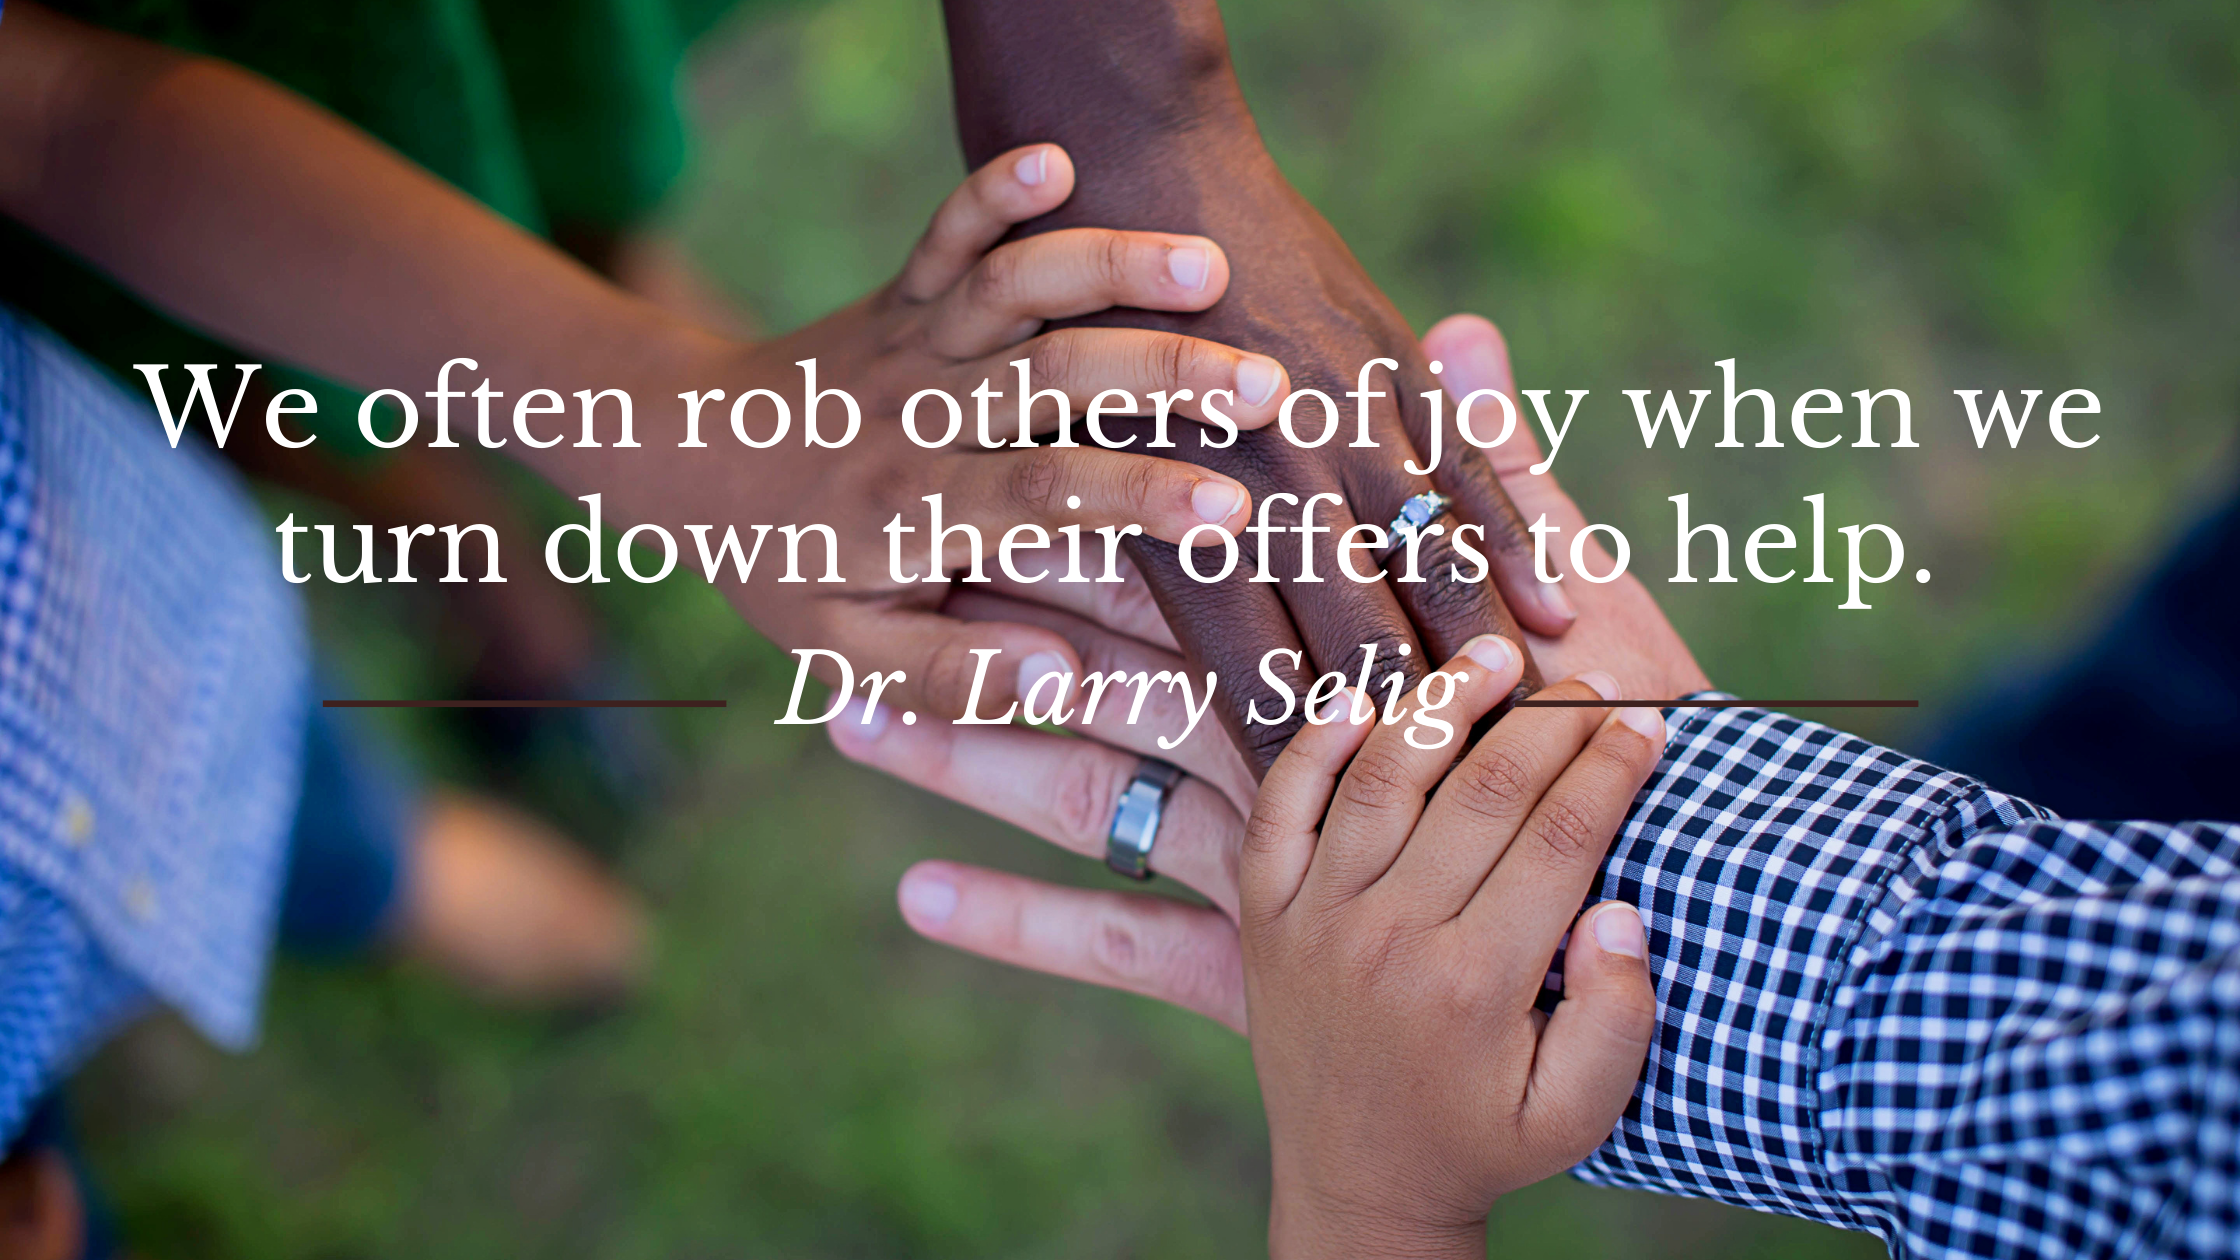 We often rob others of joy when we turn down their offers to help.